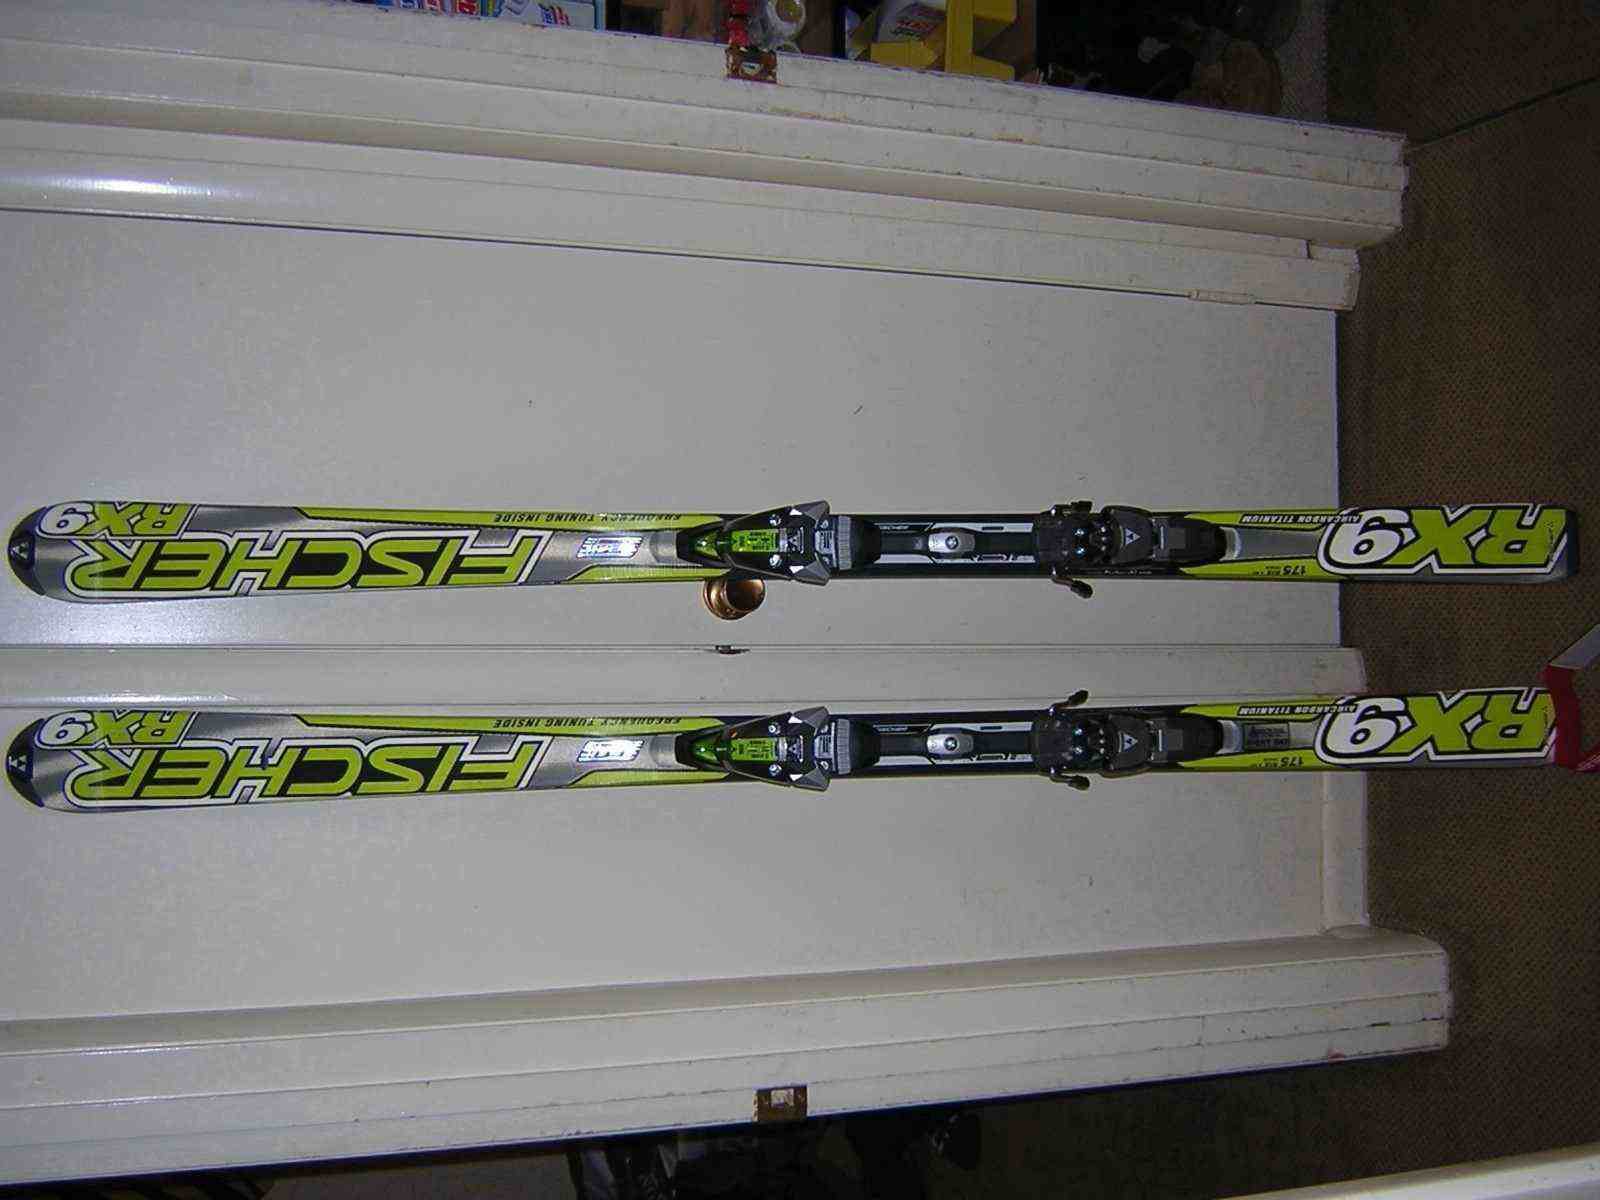 My Daddy's new skis